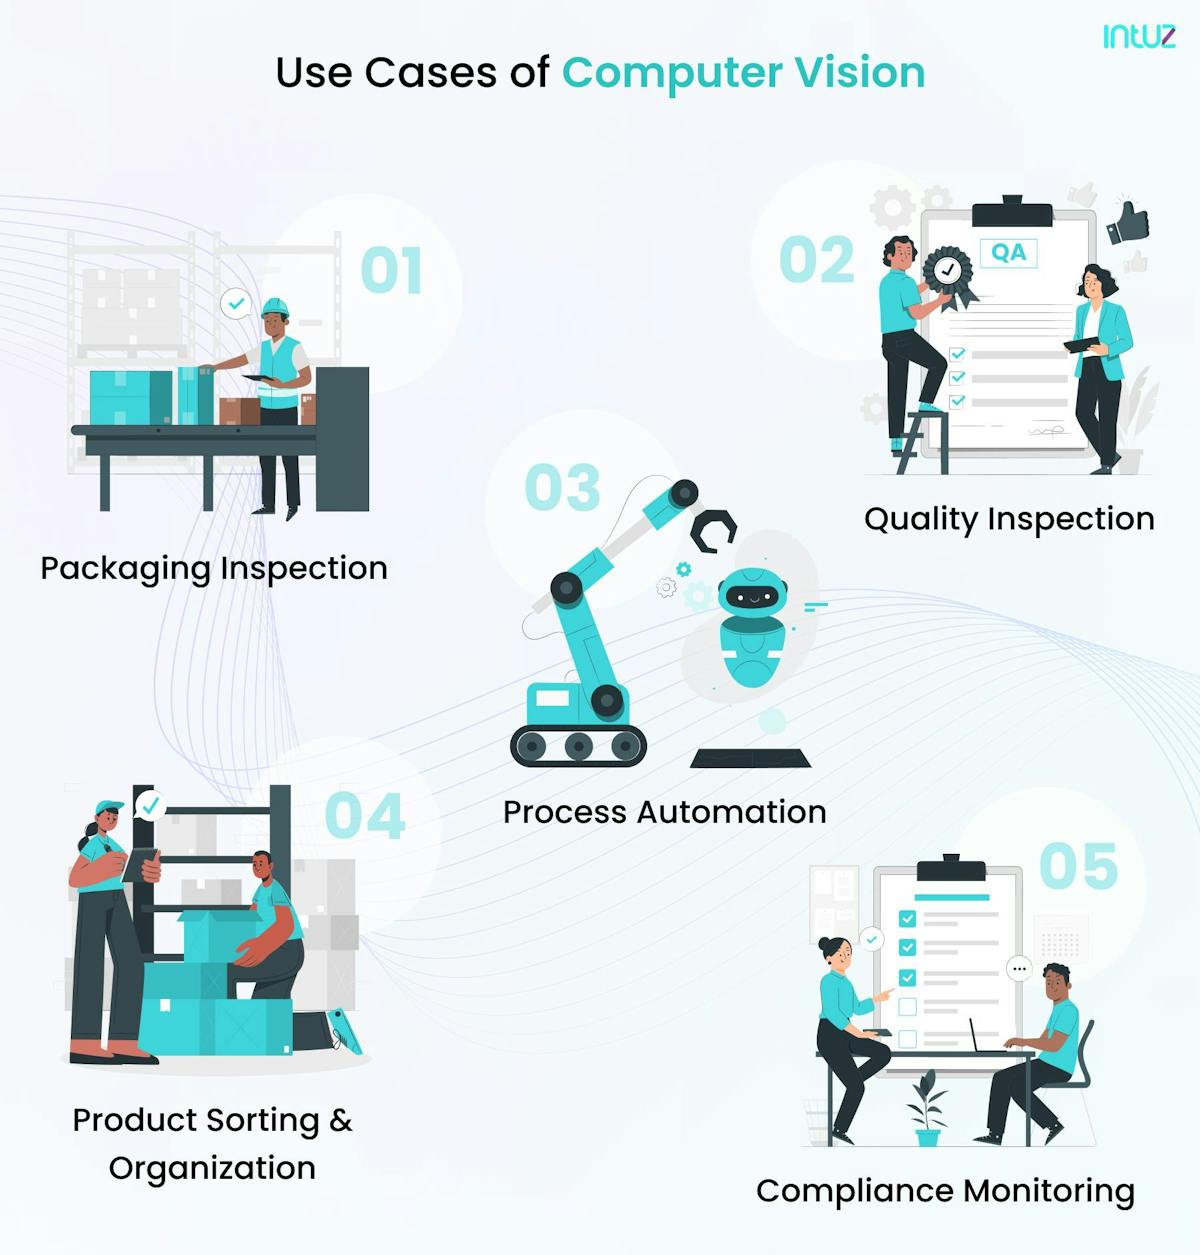 Use cases of computer vision